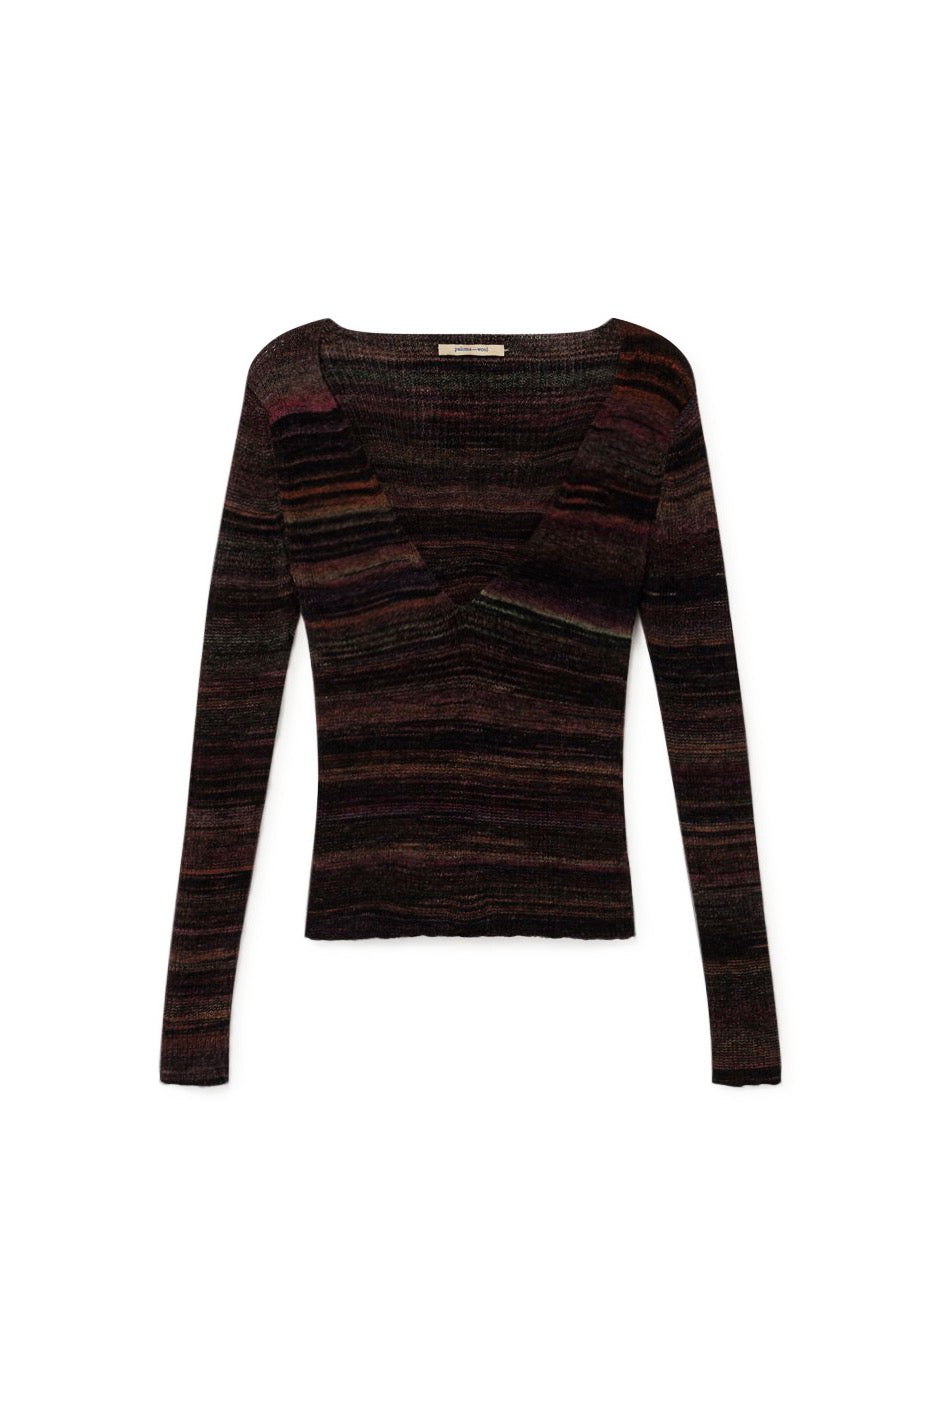 Concordia Ribbed Knit Long Sleeved Sweater - Black